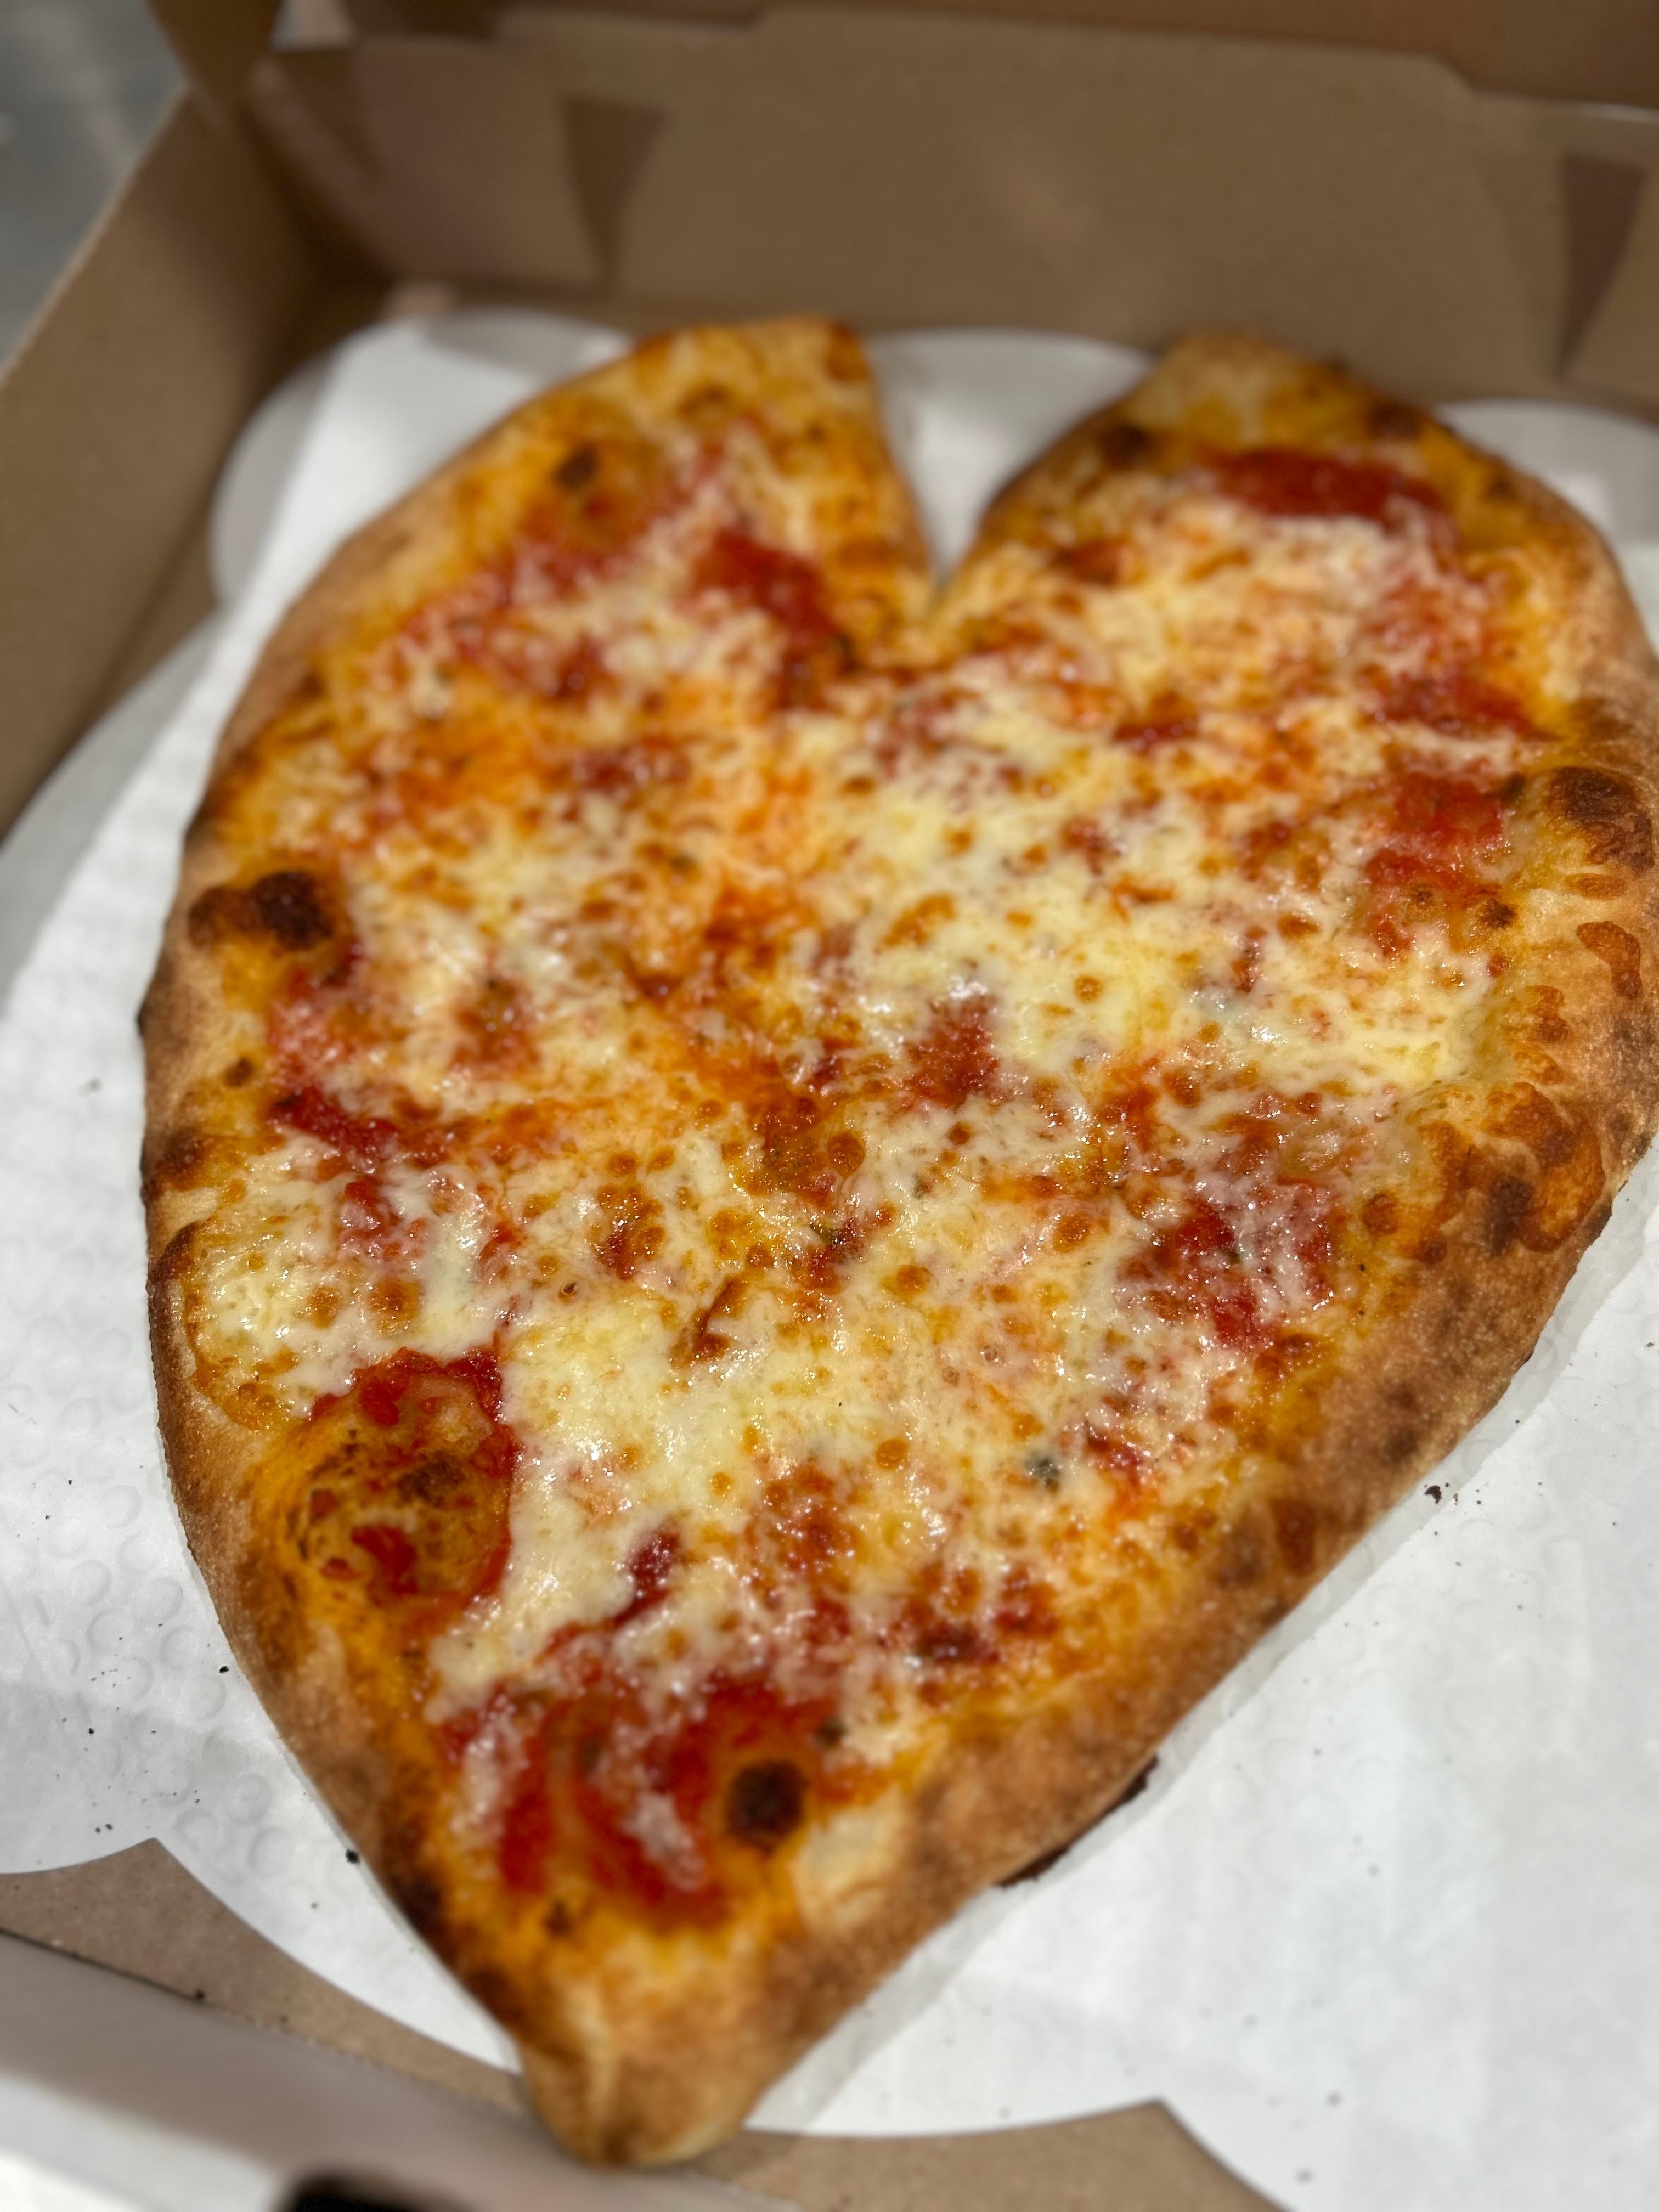 HEART 12” CHEESE PIZZA